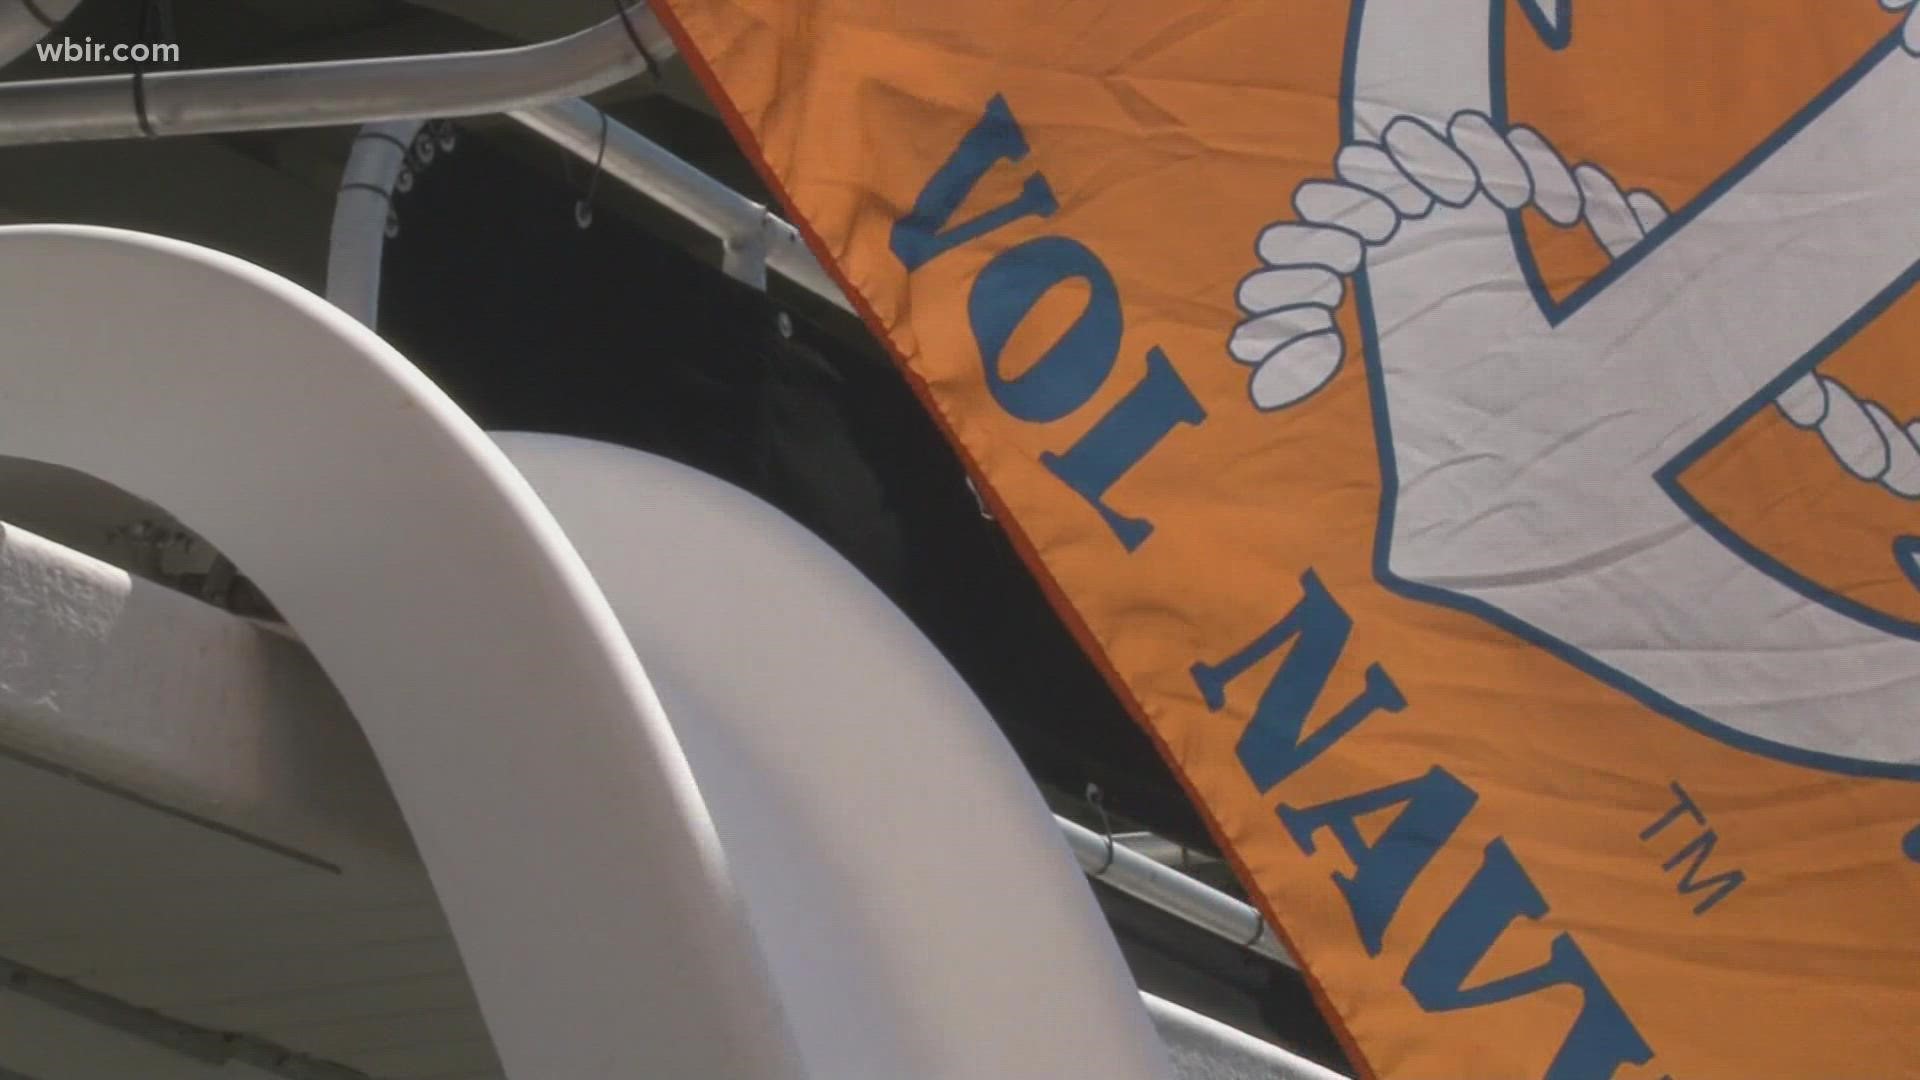 The Vol Navy has docked near Neyland Stadium to cheer for their team on the first game of the season for nearly 60 years.